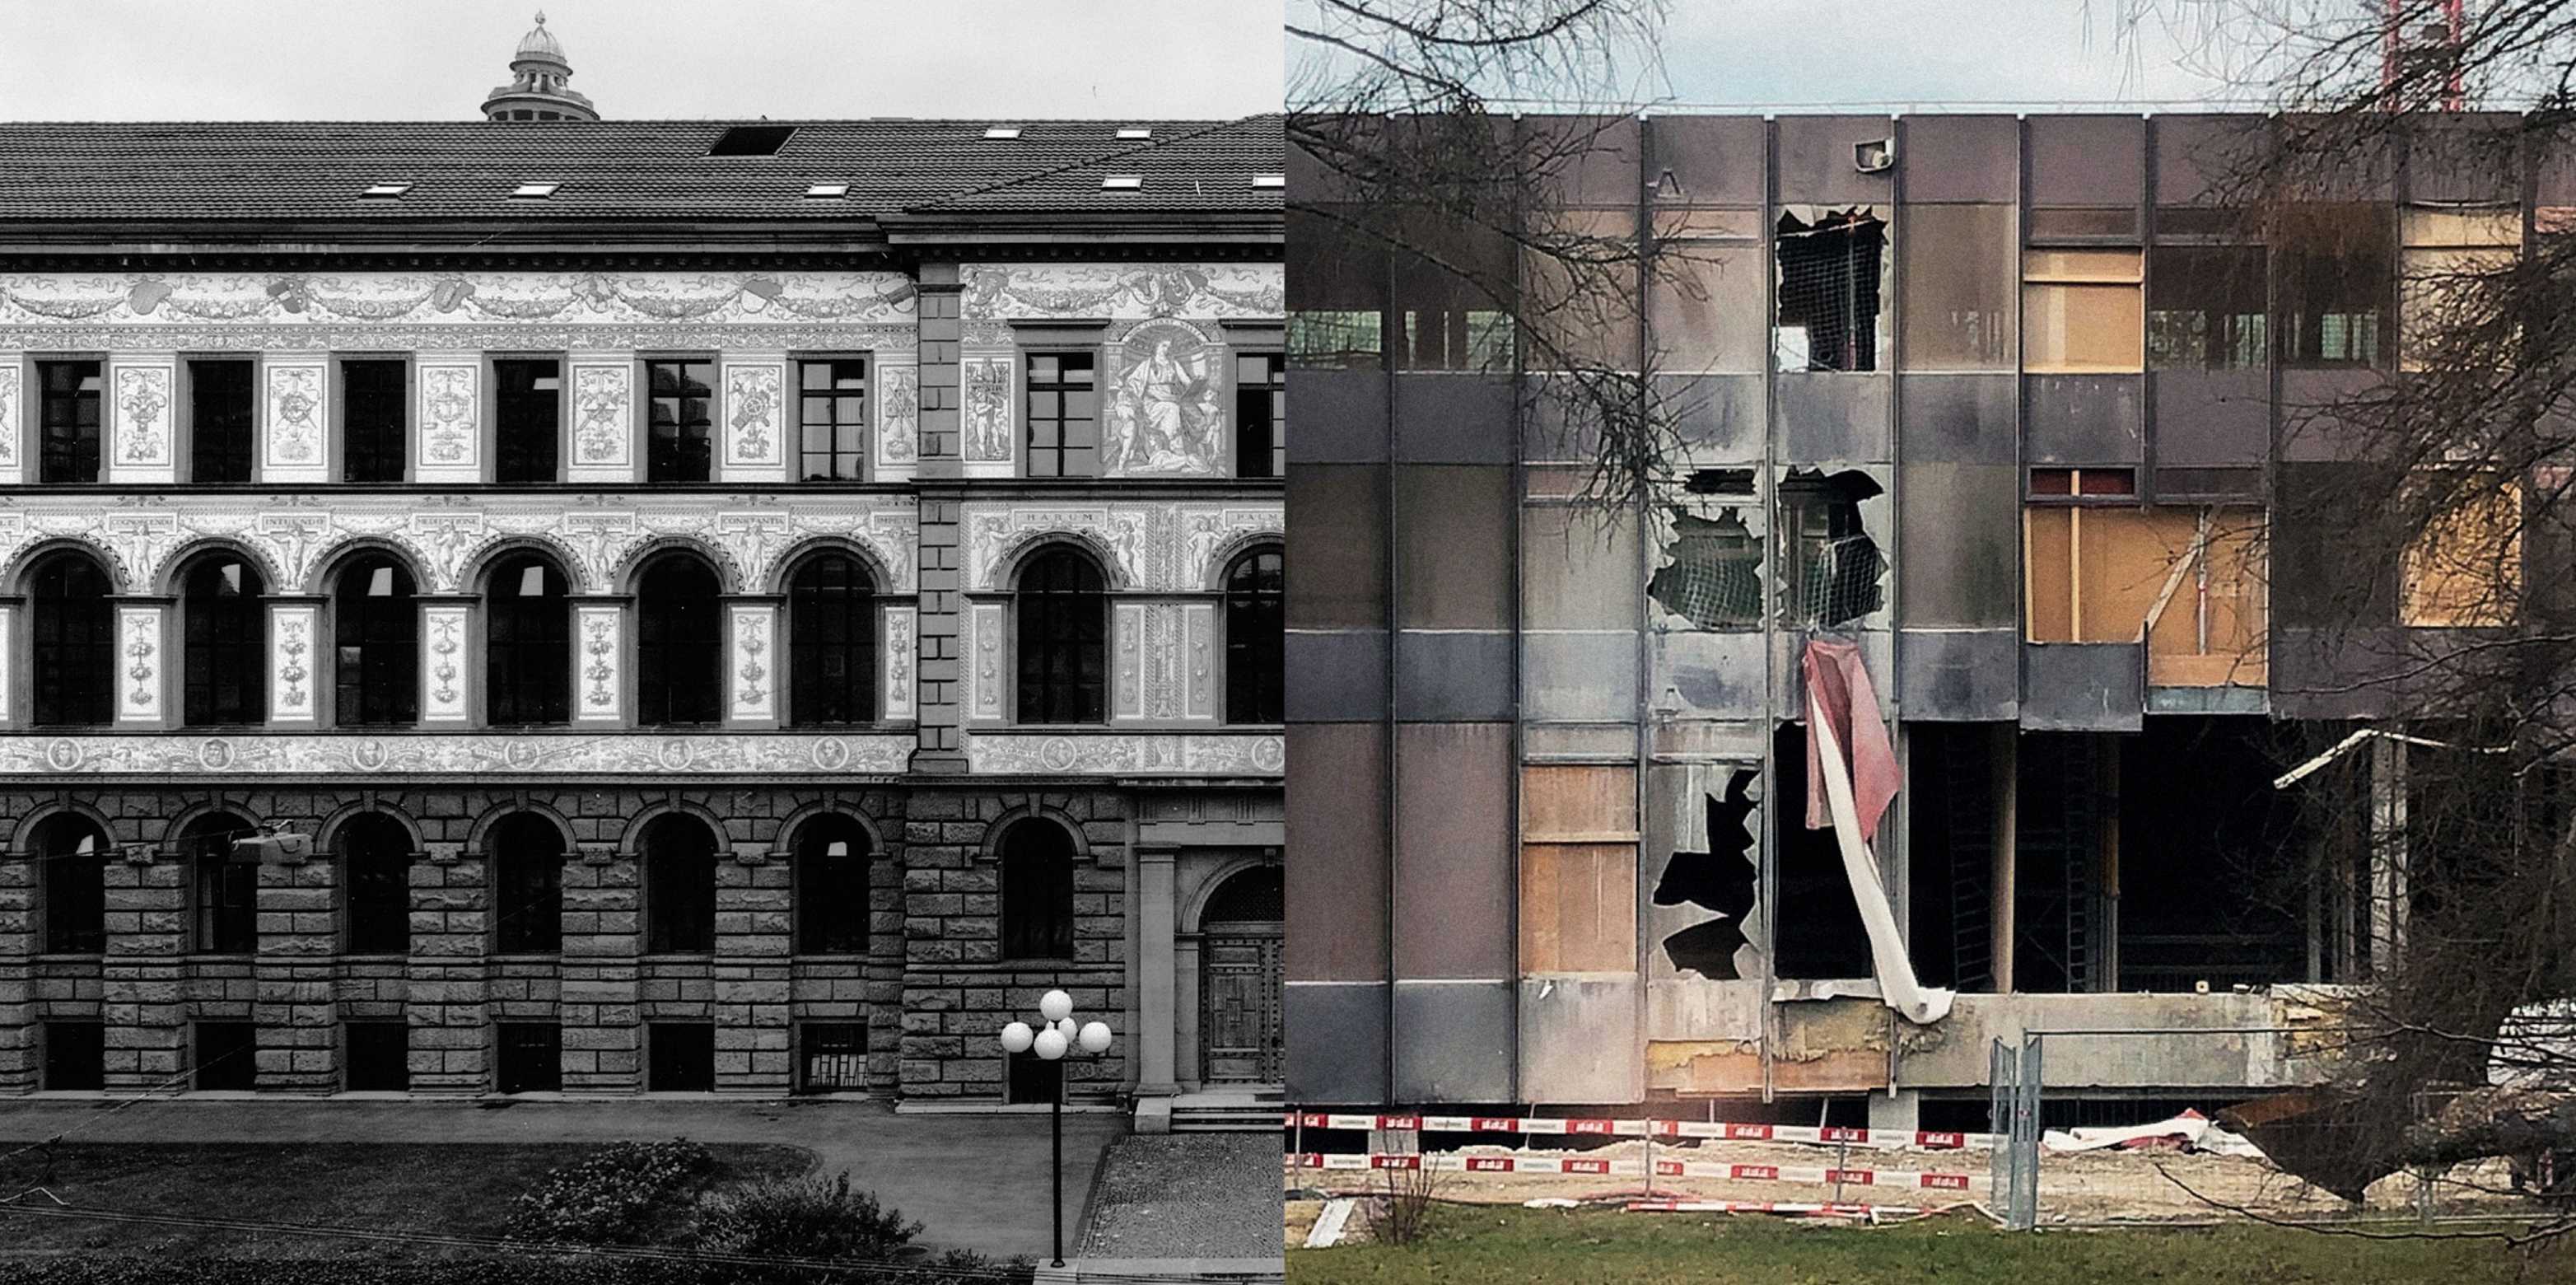 A black-and-white photograph of an old ETH building is juxtaposed with the facade of another ETH building that is currently being demolished.